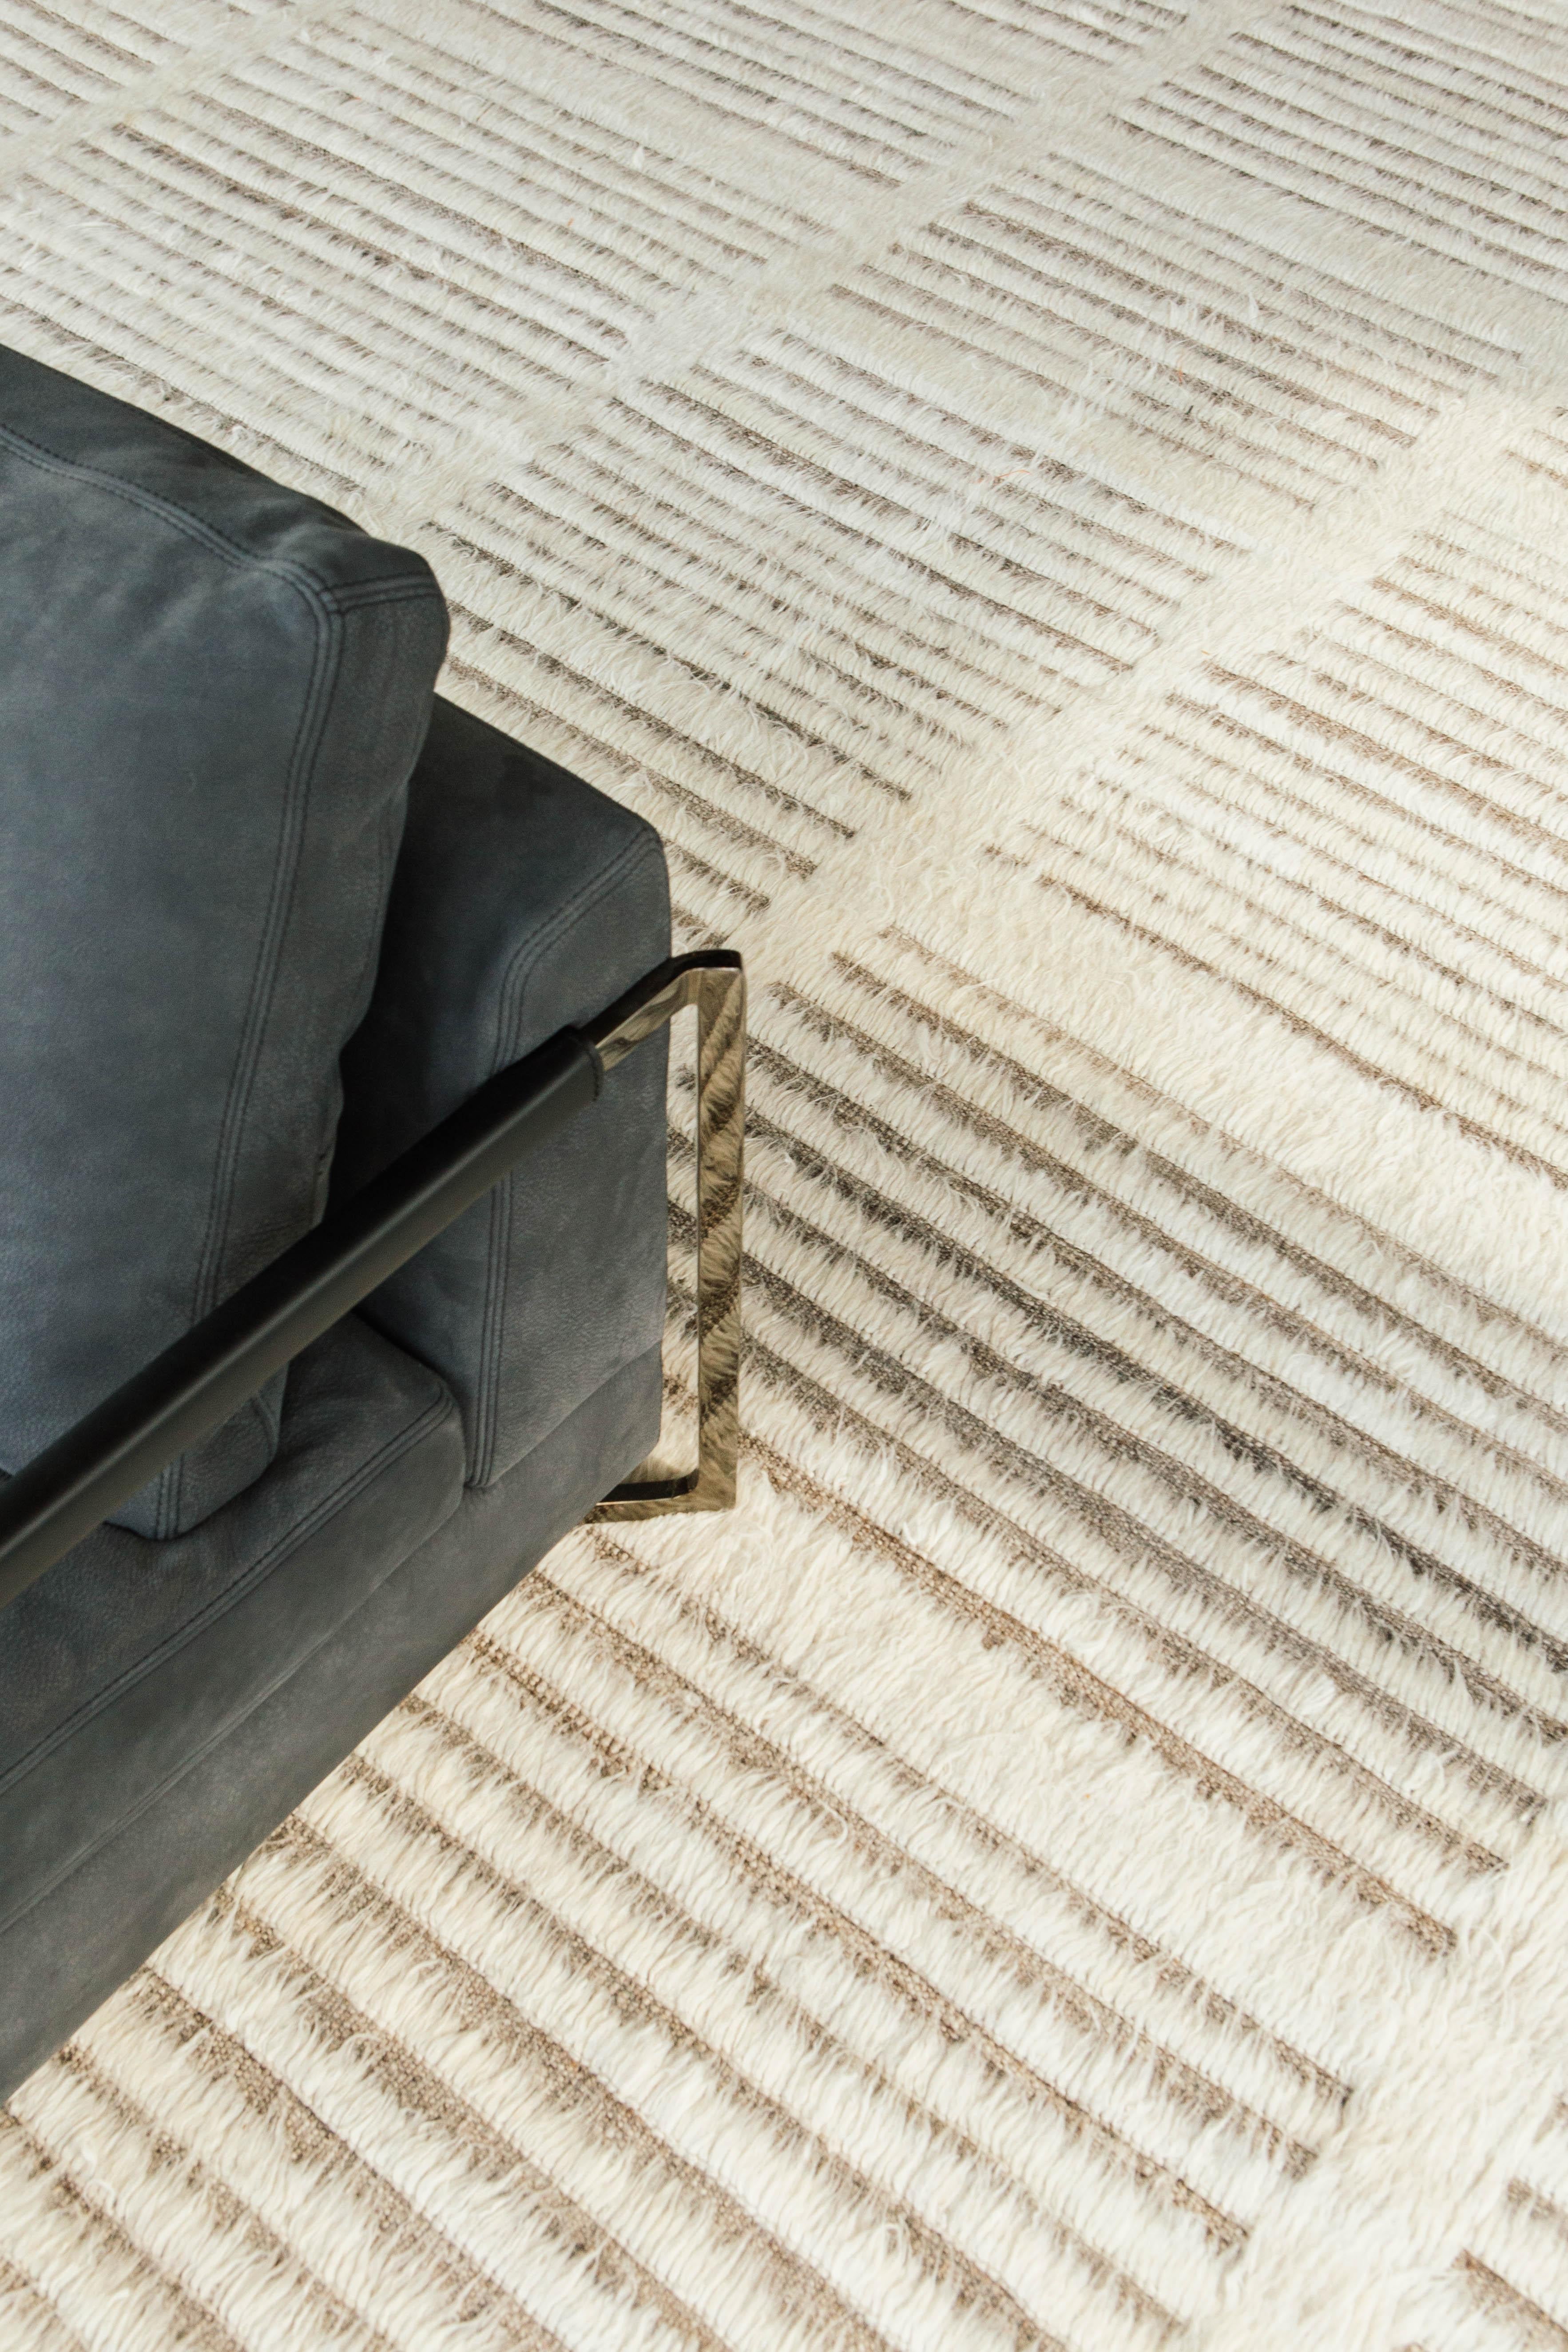 The signature Collection of California. Handwoven luxurious wool rug, made of timeless design elements and neutral earth tones with the perfect shade of white. Haute Bohemian Collection: designed in Los Angeles named for the winds knitting together